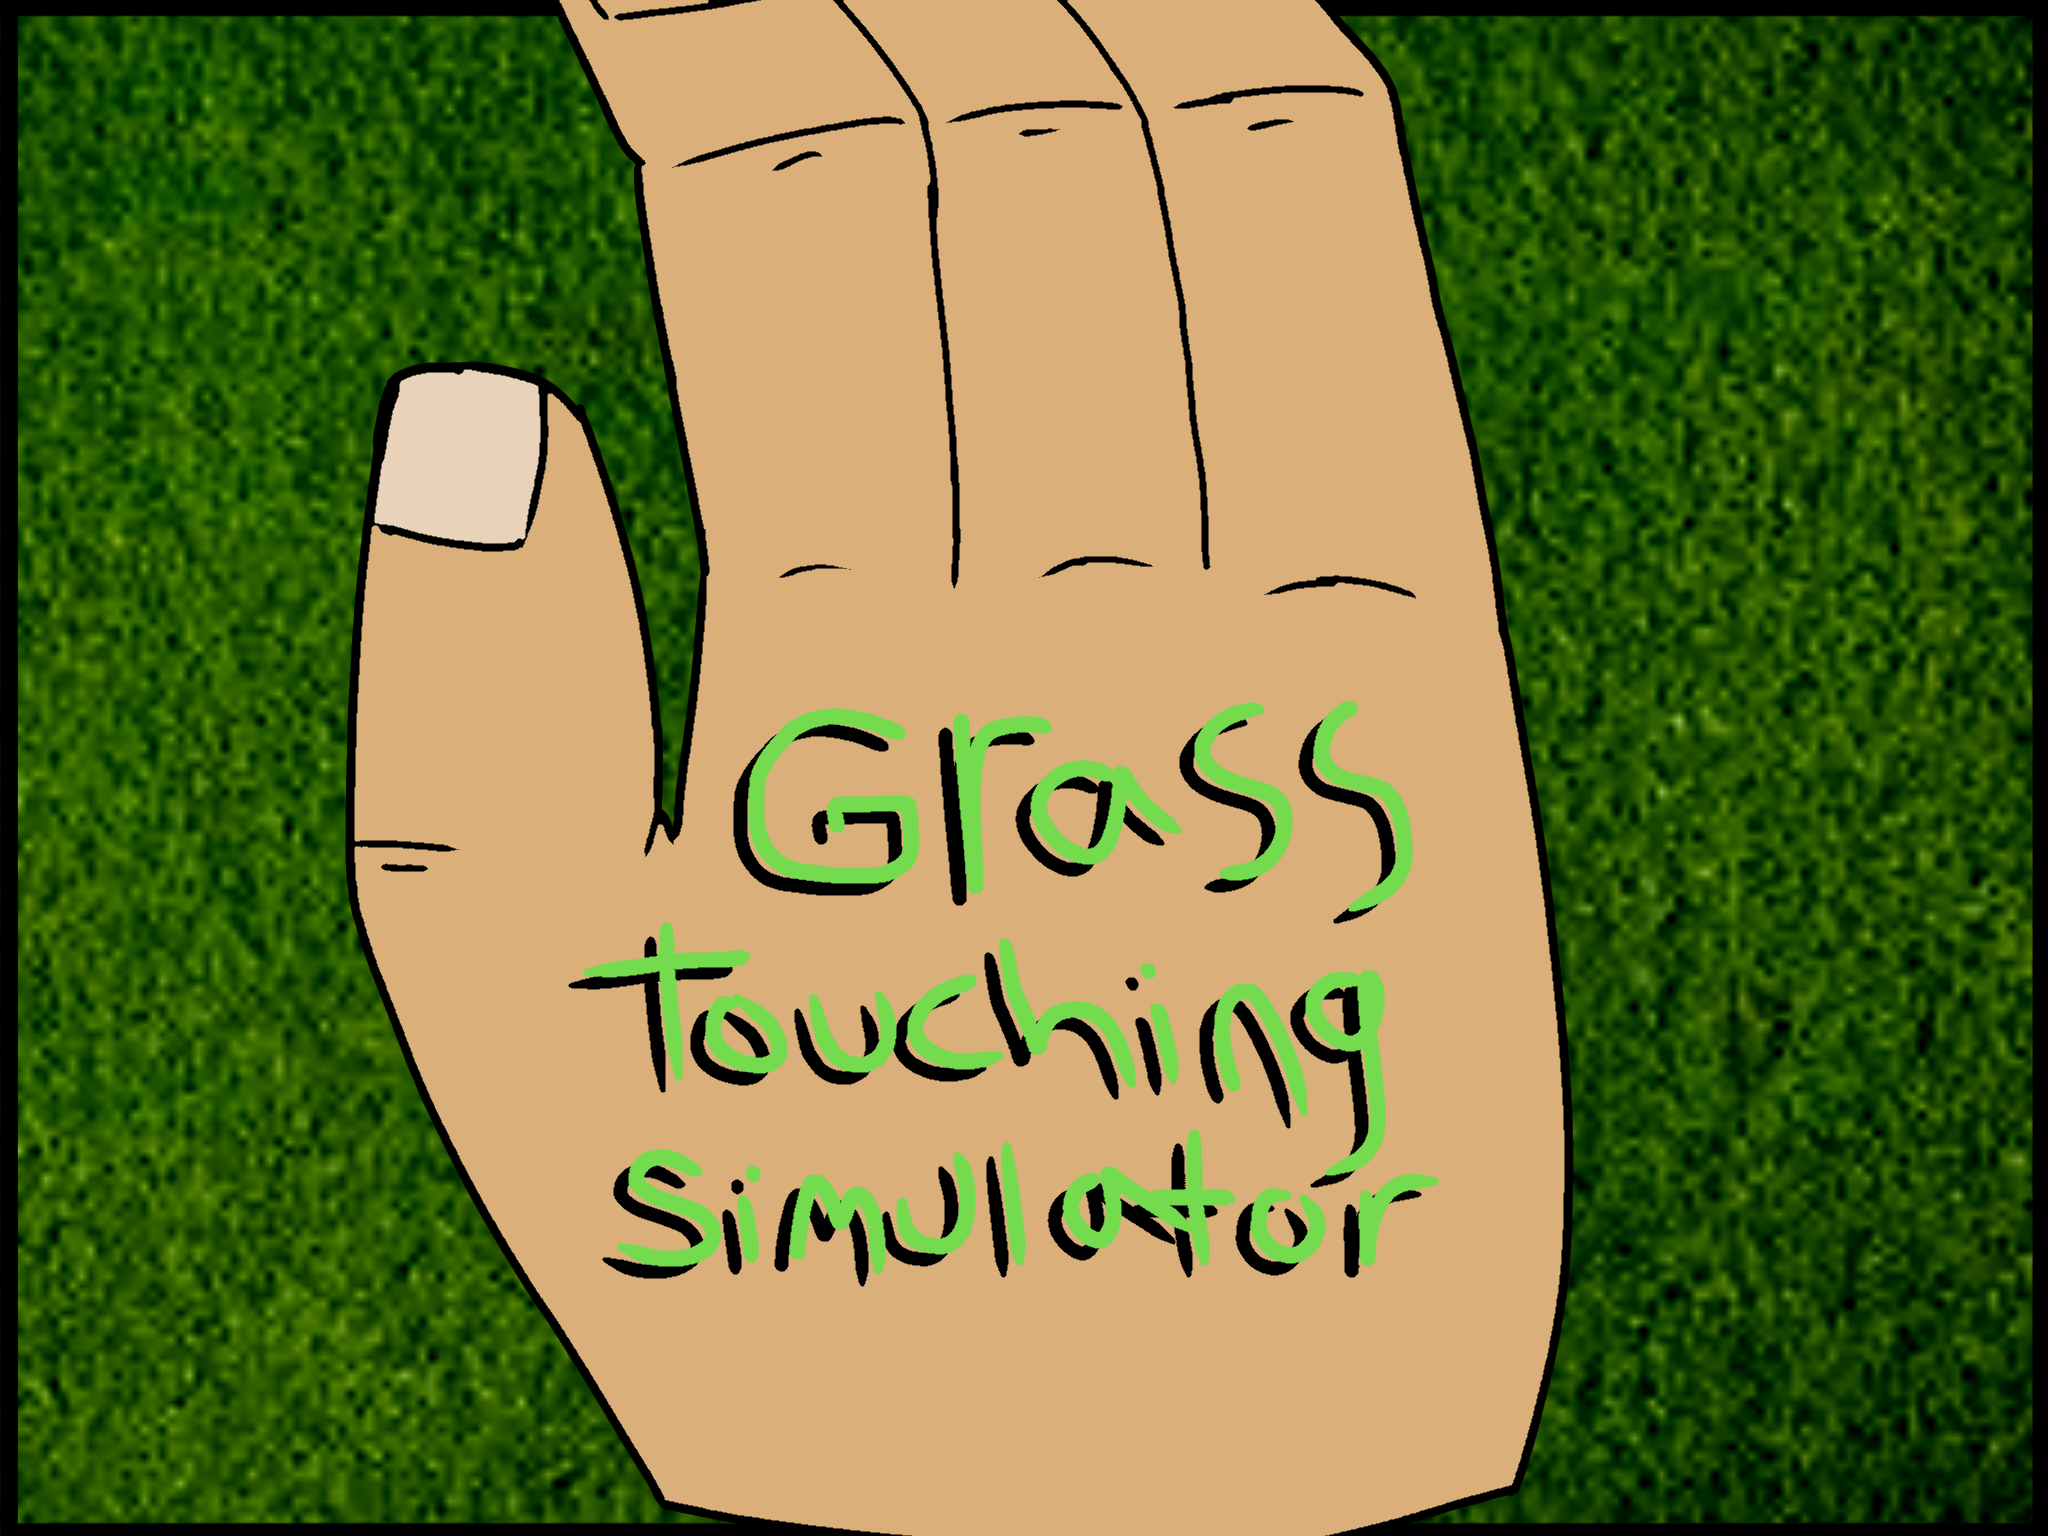 grass-touching-simulator-by-meltdown-games